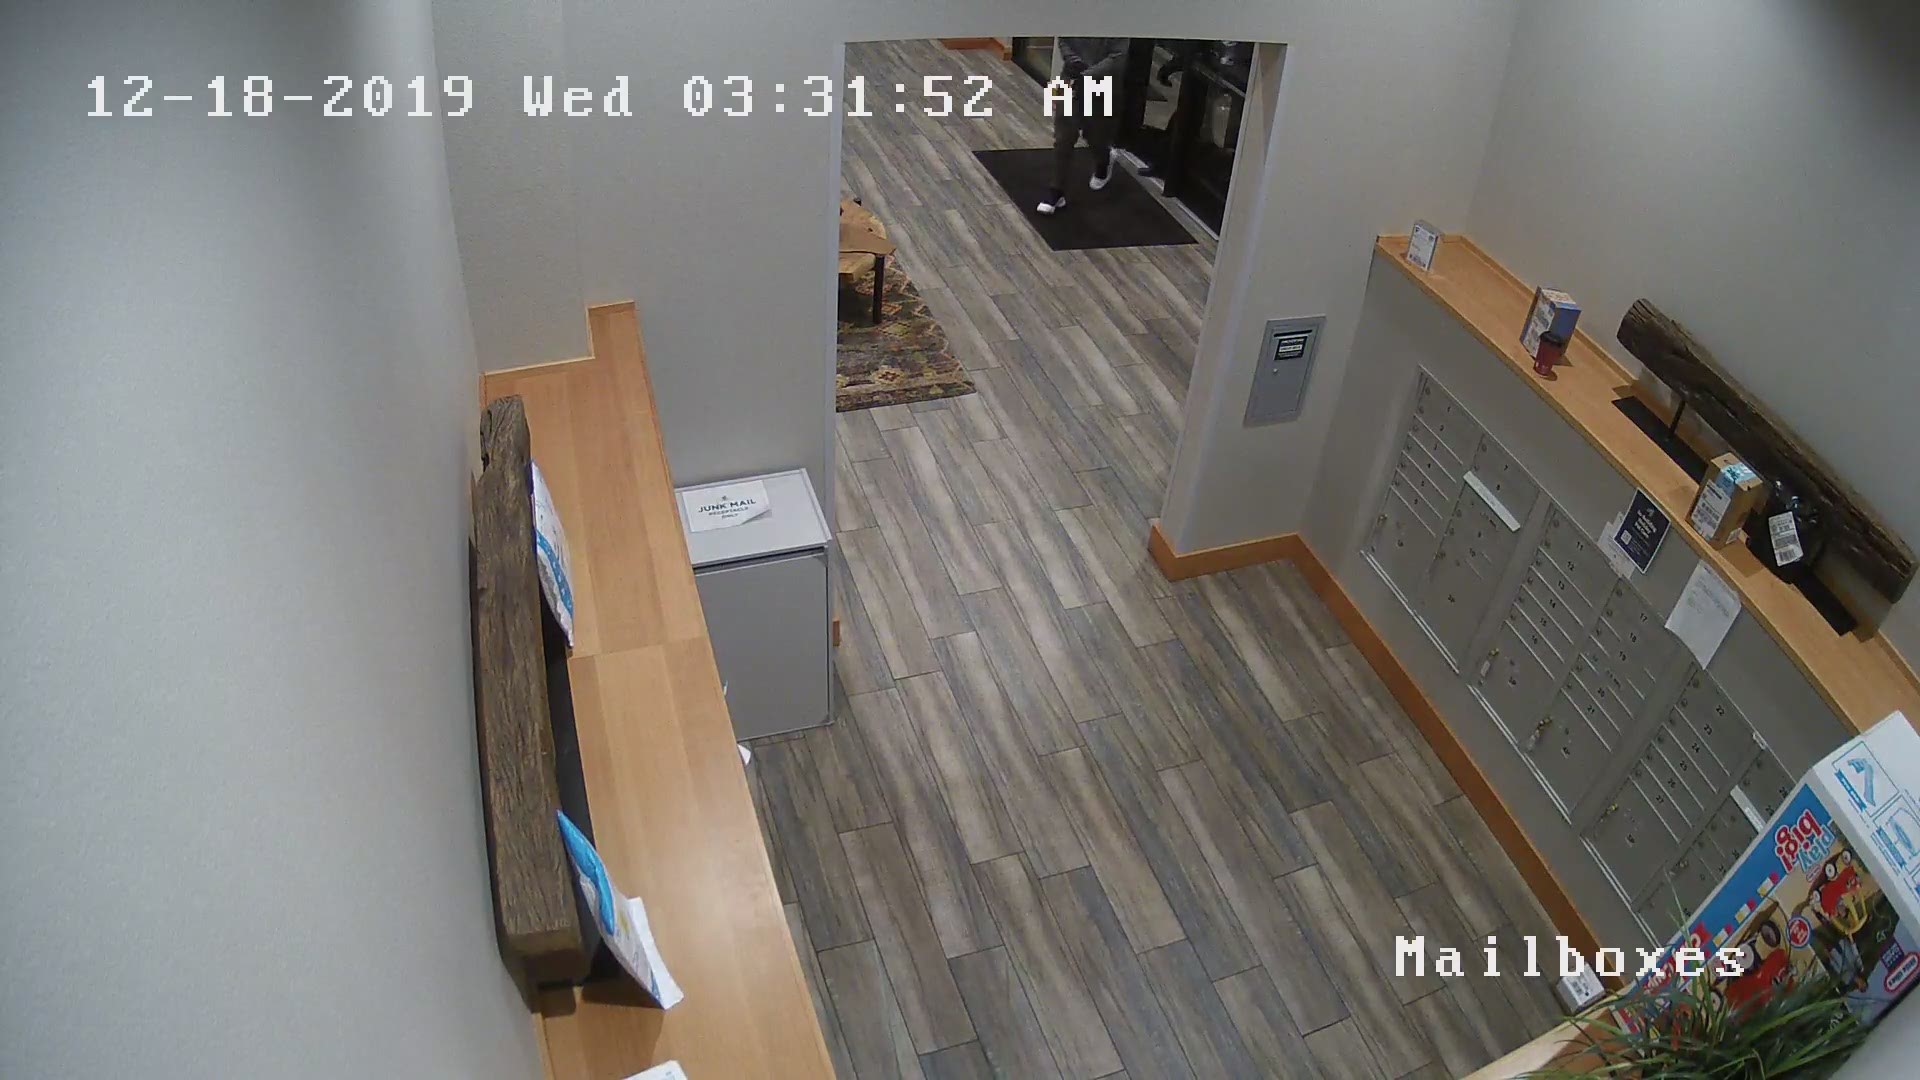 December 18th video shows 2 people stealing packages from a mail room in southeast Portland